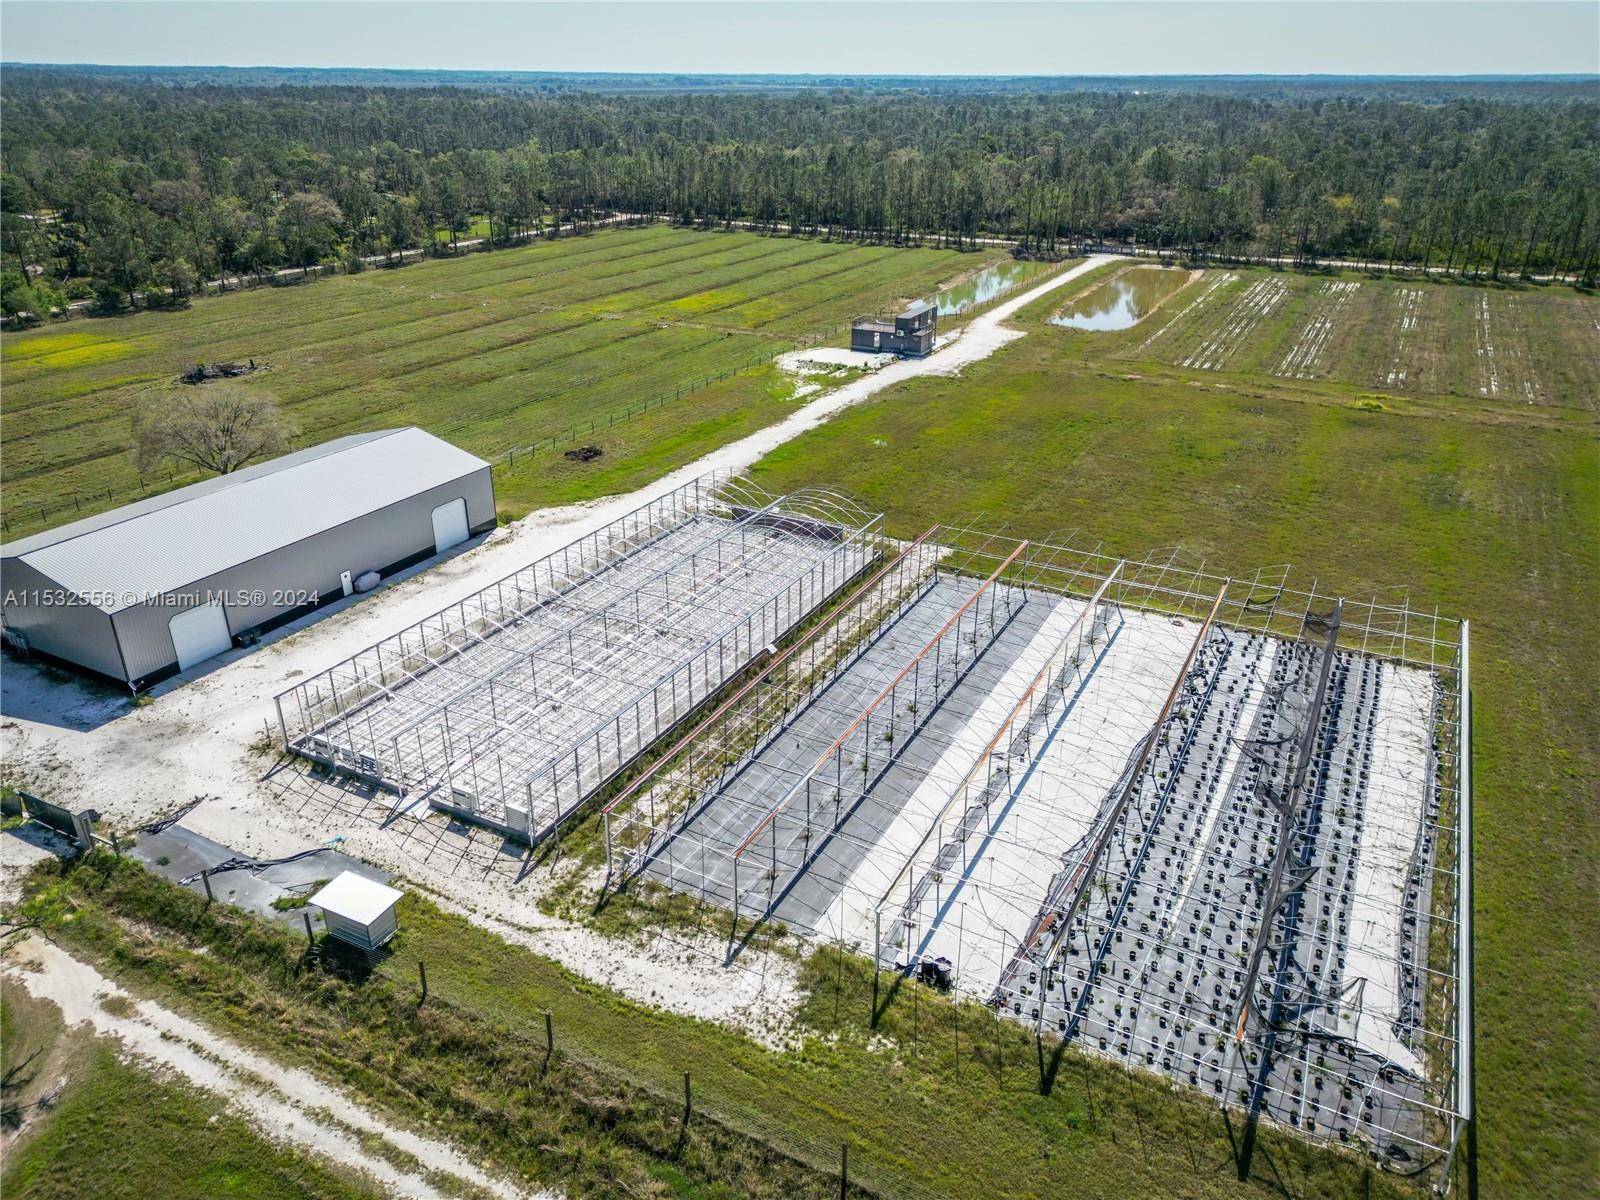 20. 15 acres zoned open use agriculture, completely fenced and gated, on a gated road, with a 7, 986 steel warehouse with 3 roll up bay doors and heavy duty ...